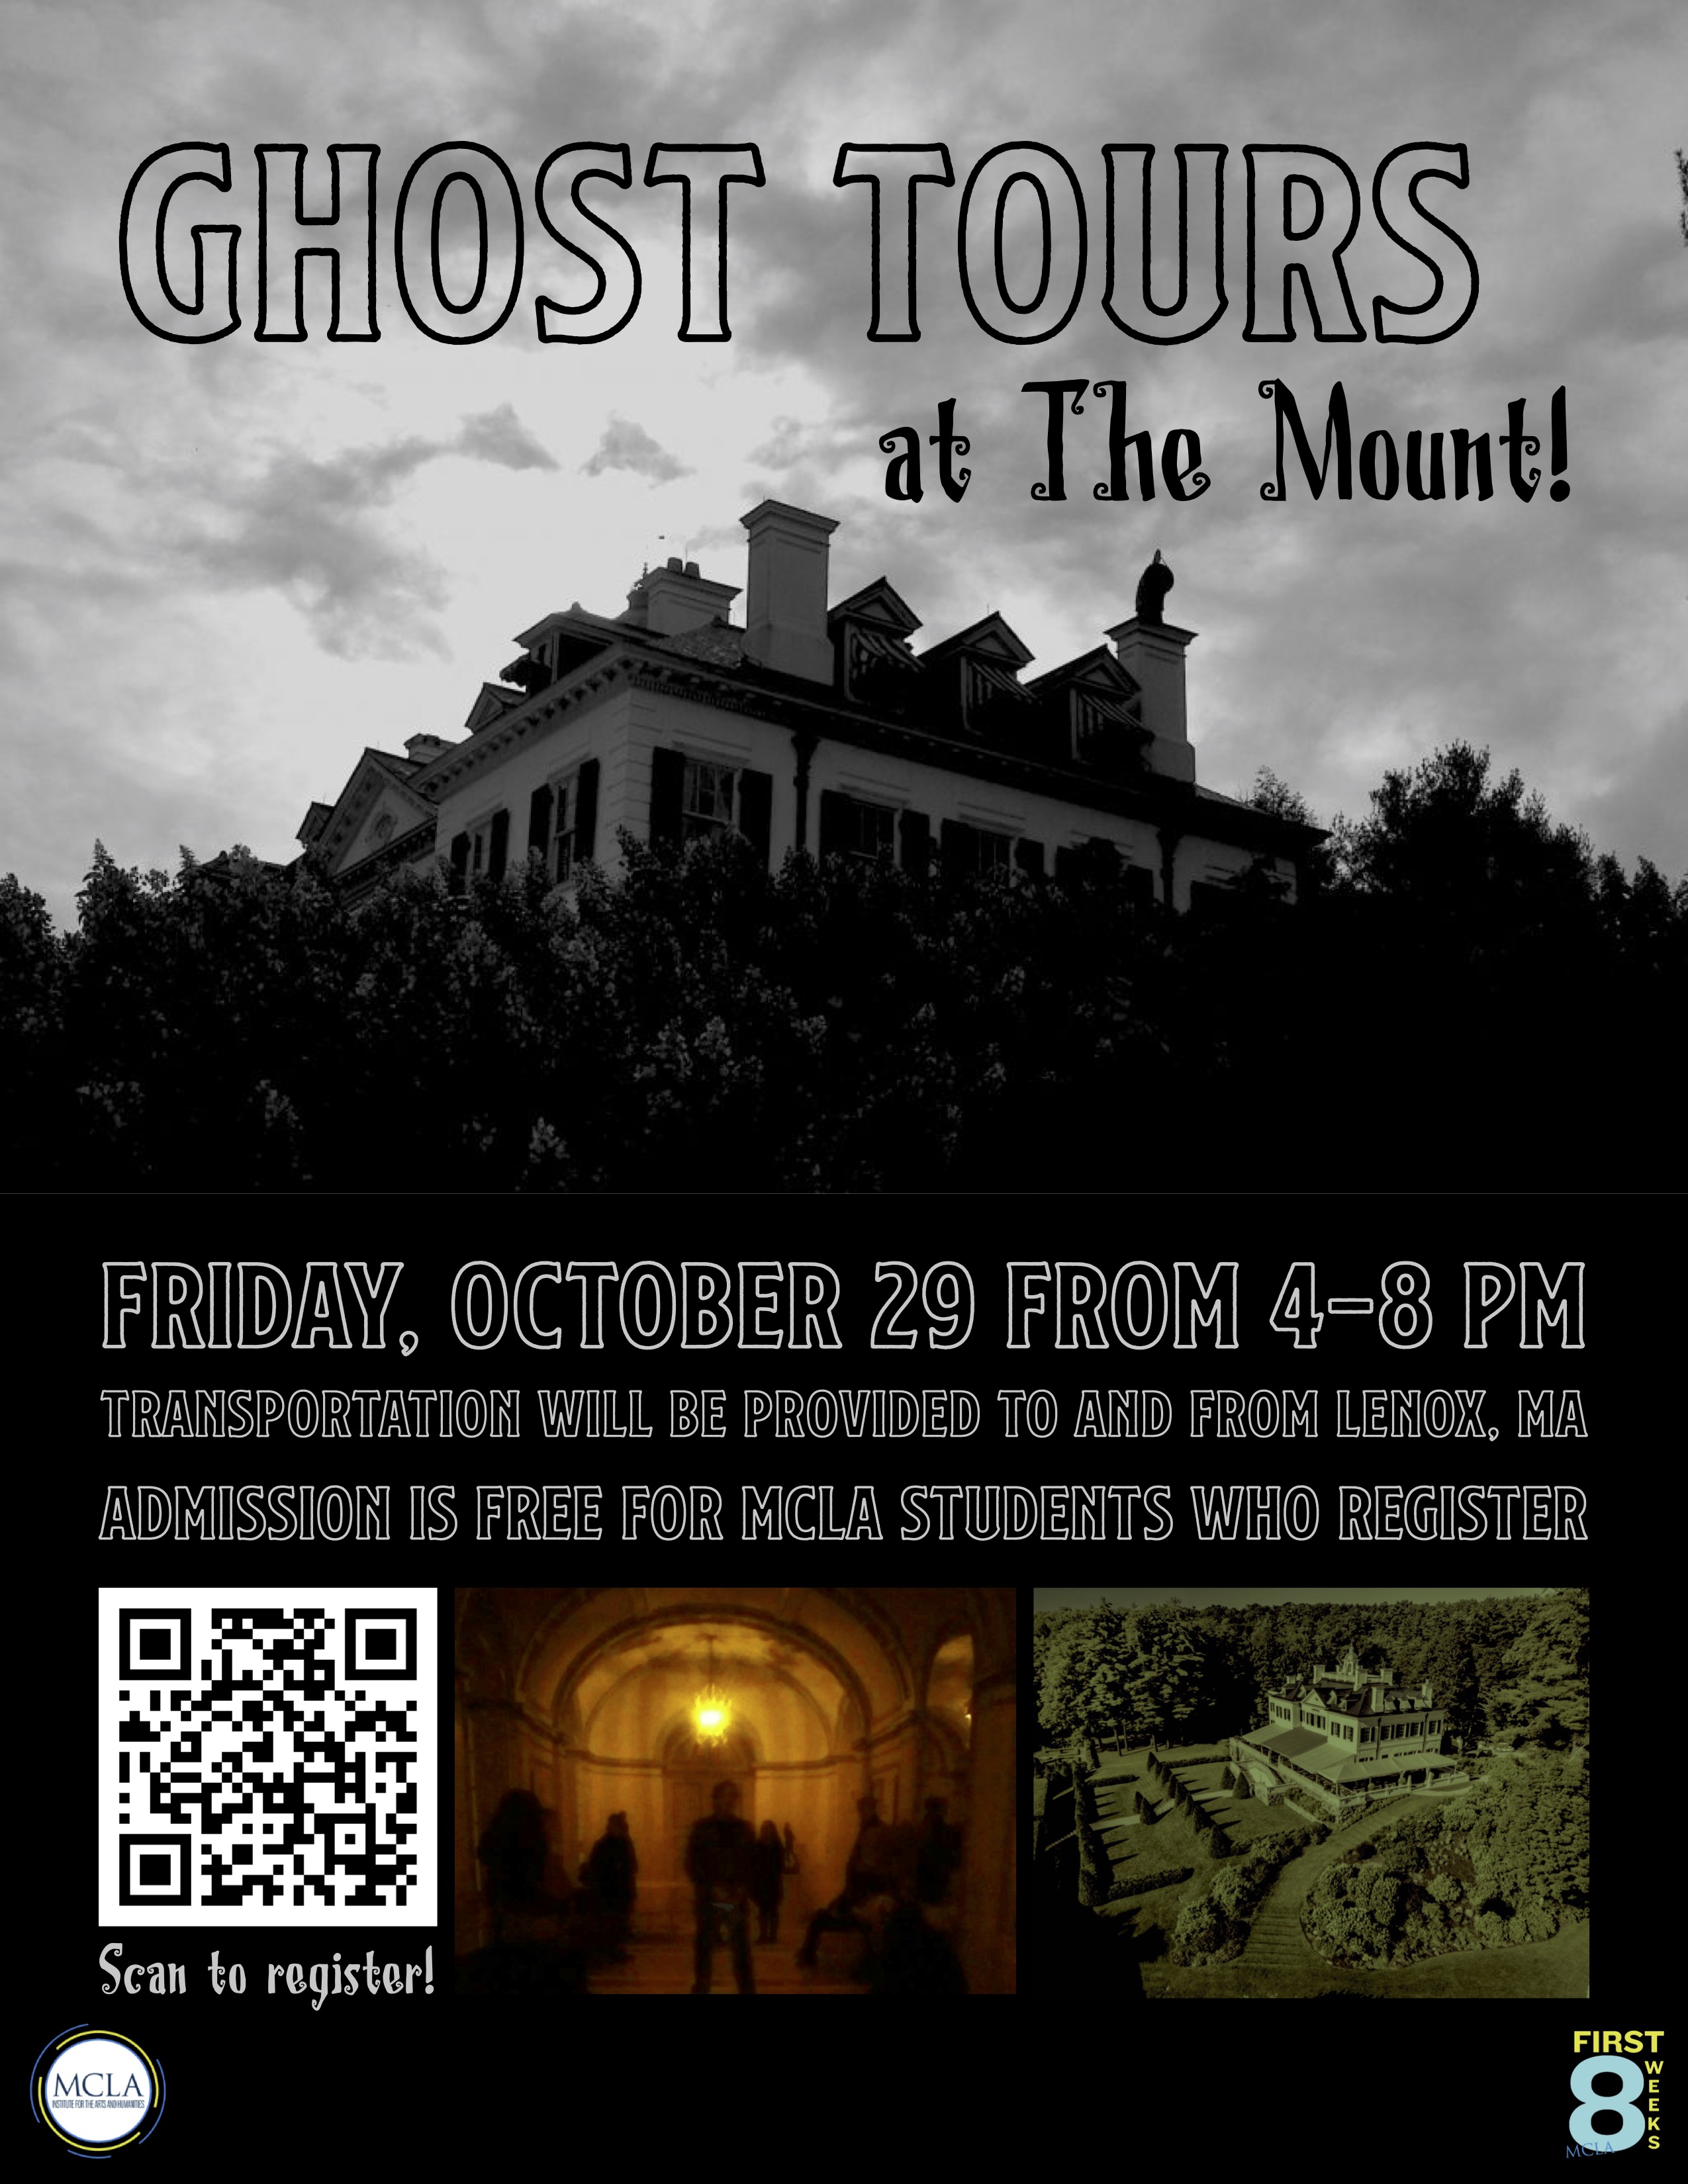 Poster advertising ghost tours at the Mount